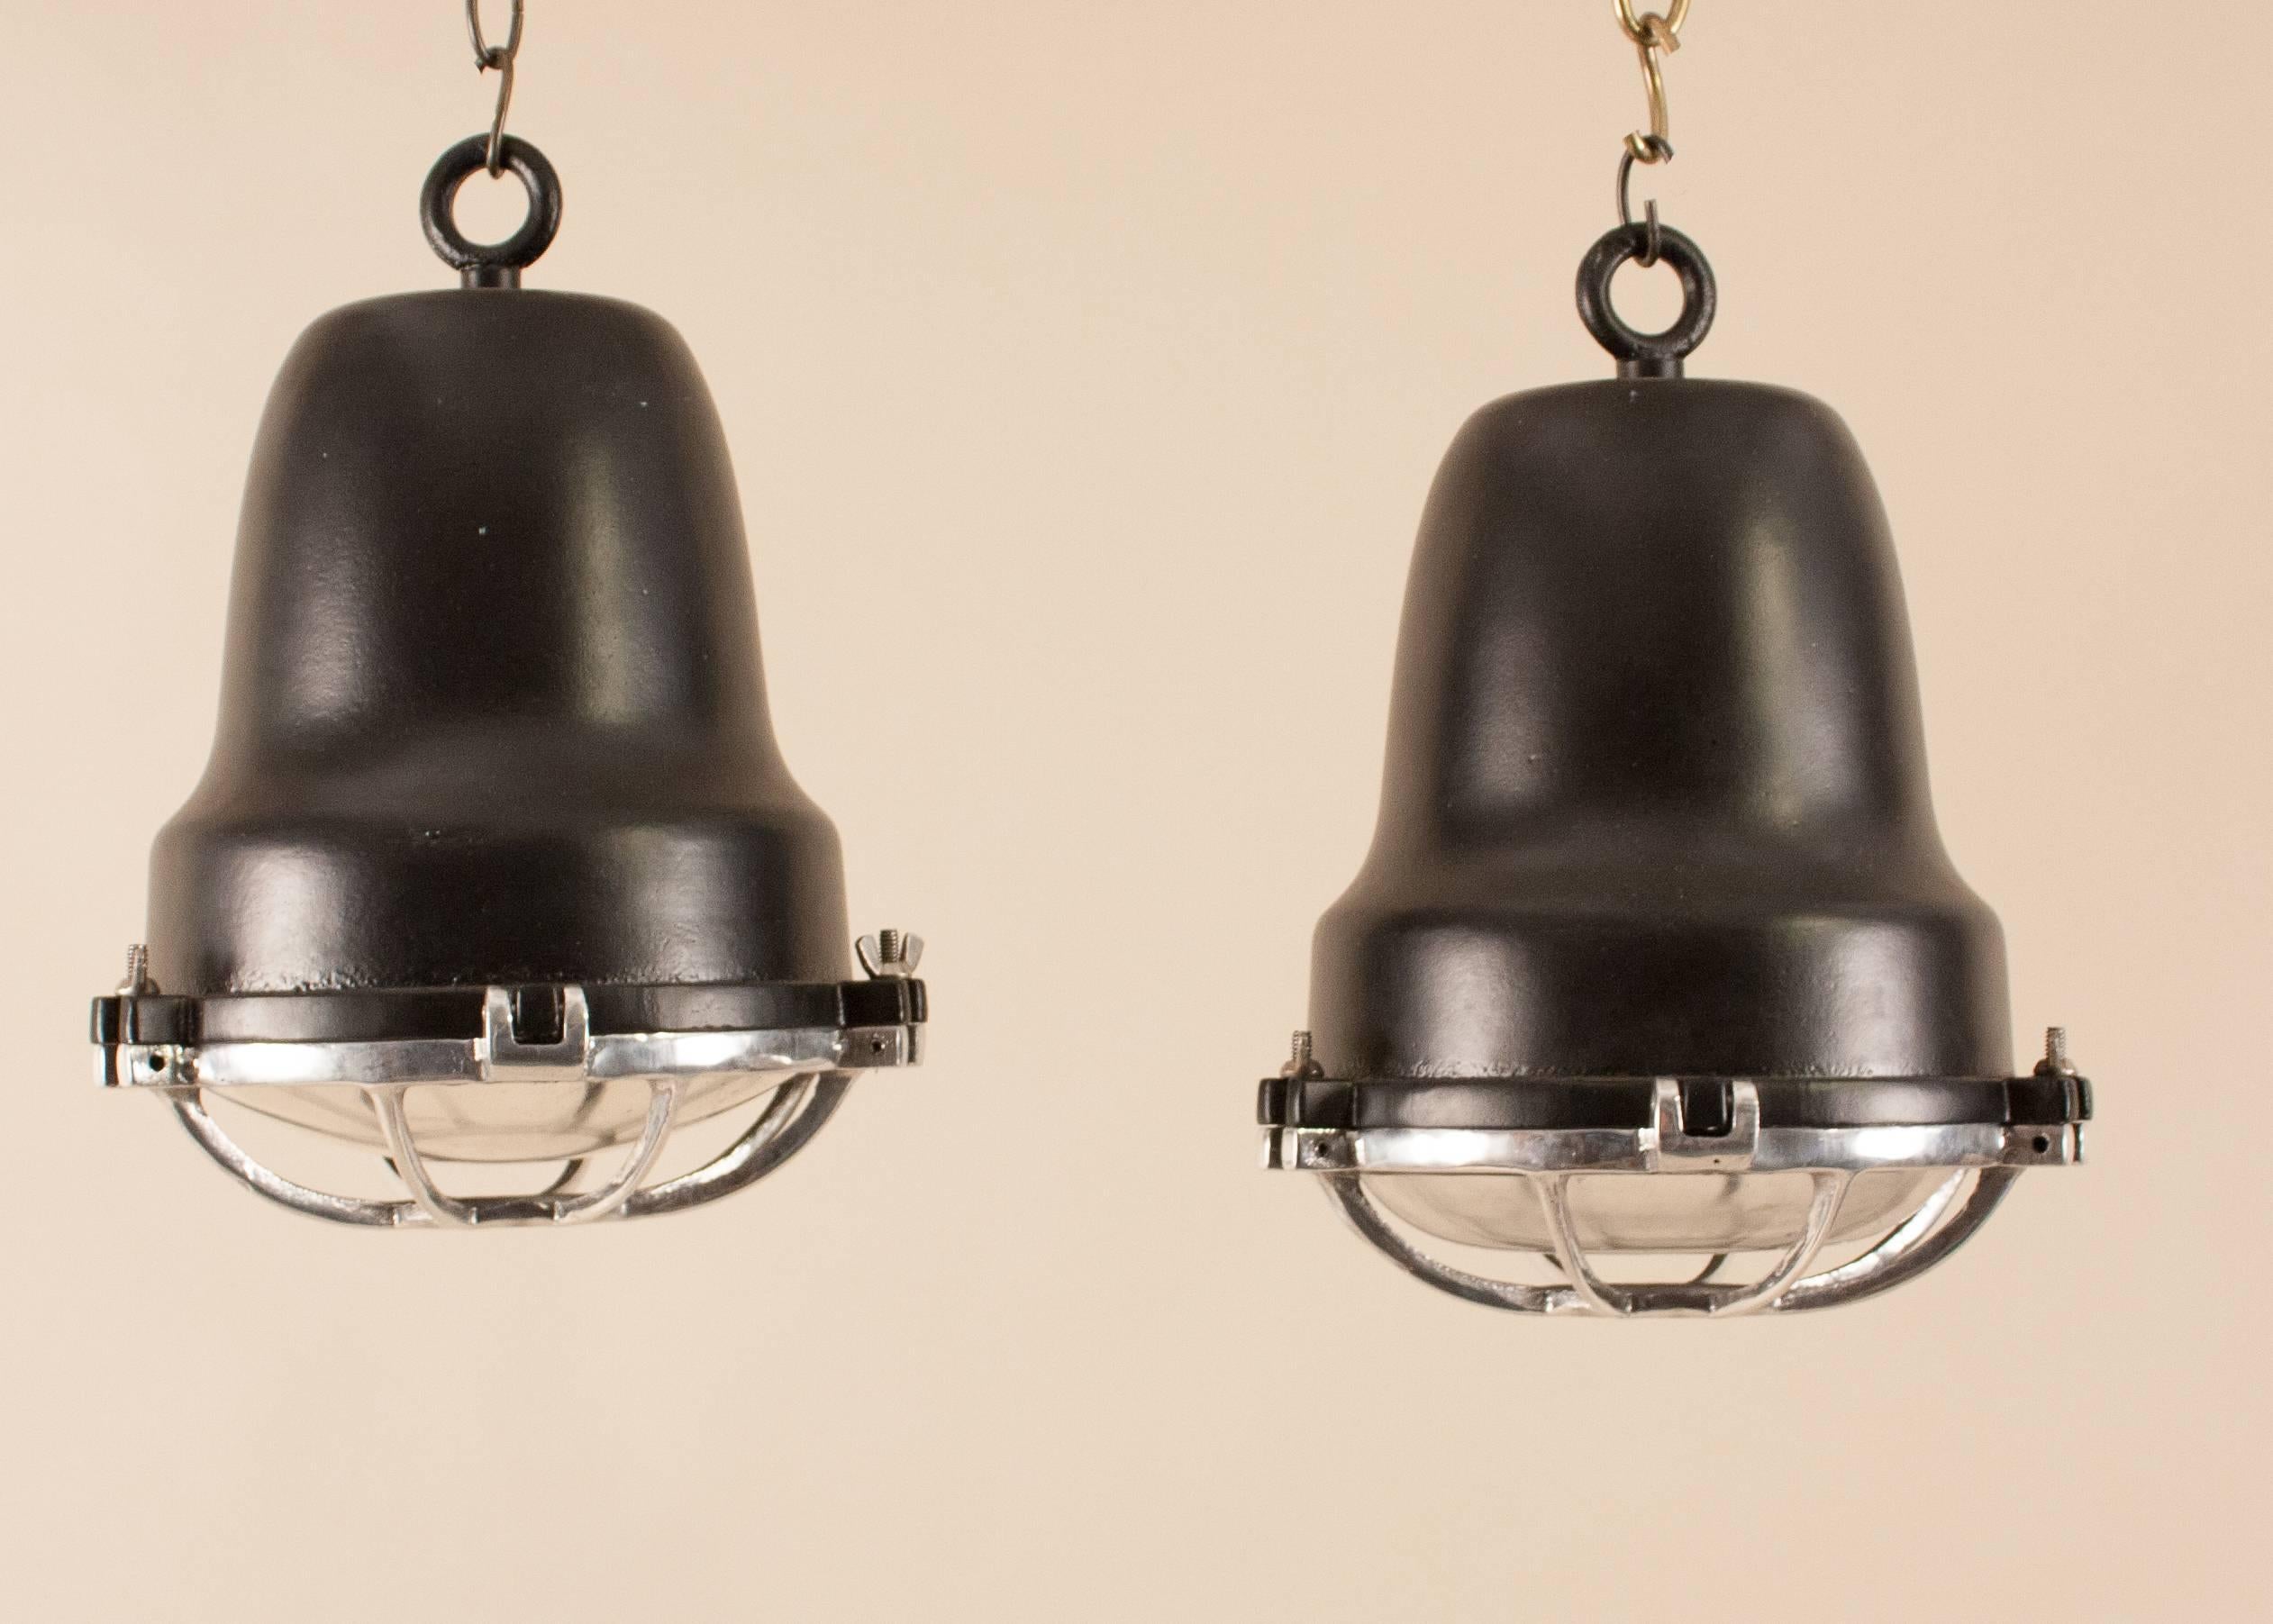 Very good-looking pair of aluminum and black powder-coated marine or industrial pendants, circa 1970. Manufactured for use on merchant vessels by Circle D of Carlstadt, NJ, the spotlights have weatherproof convex lenses protected by cast aluminum,